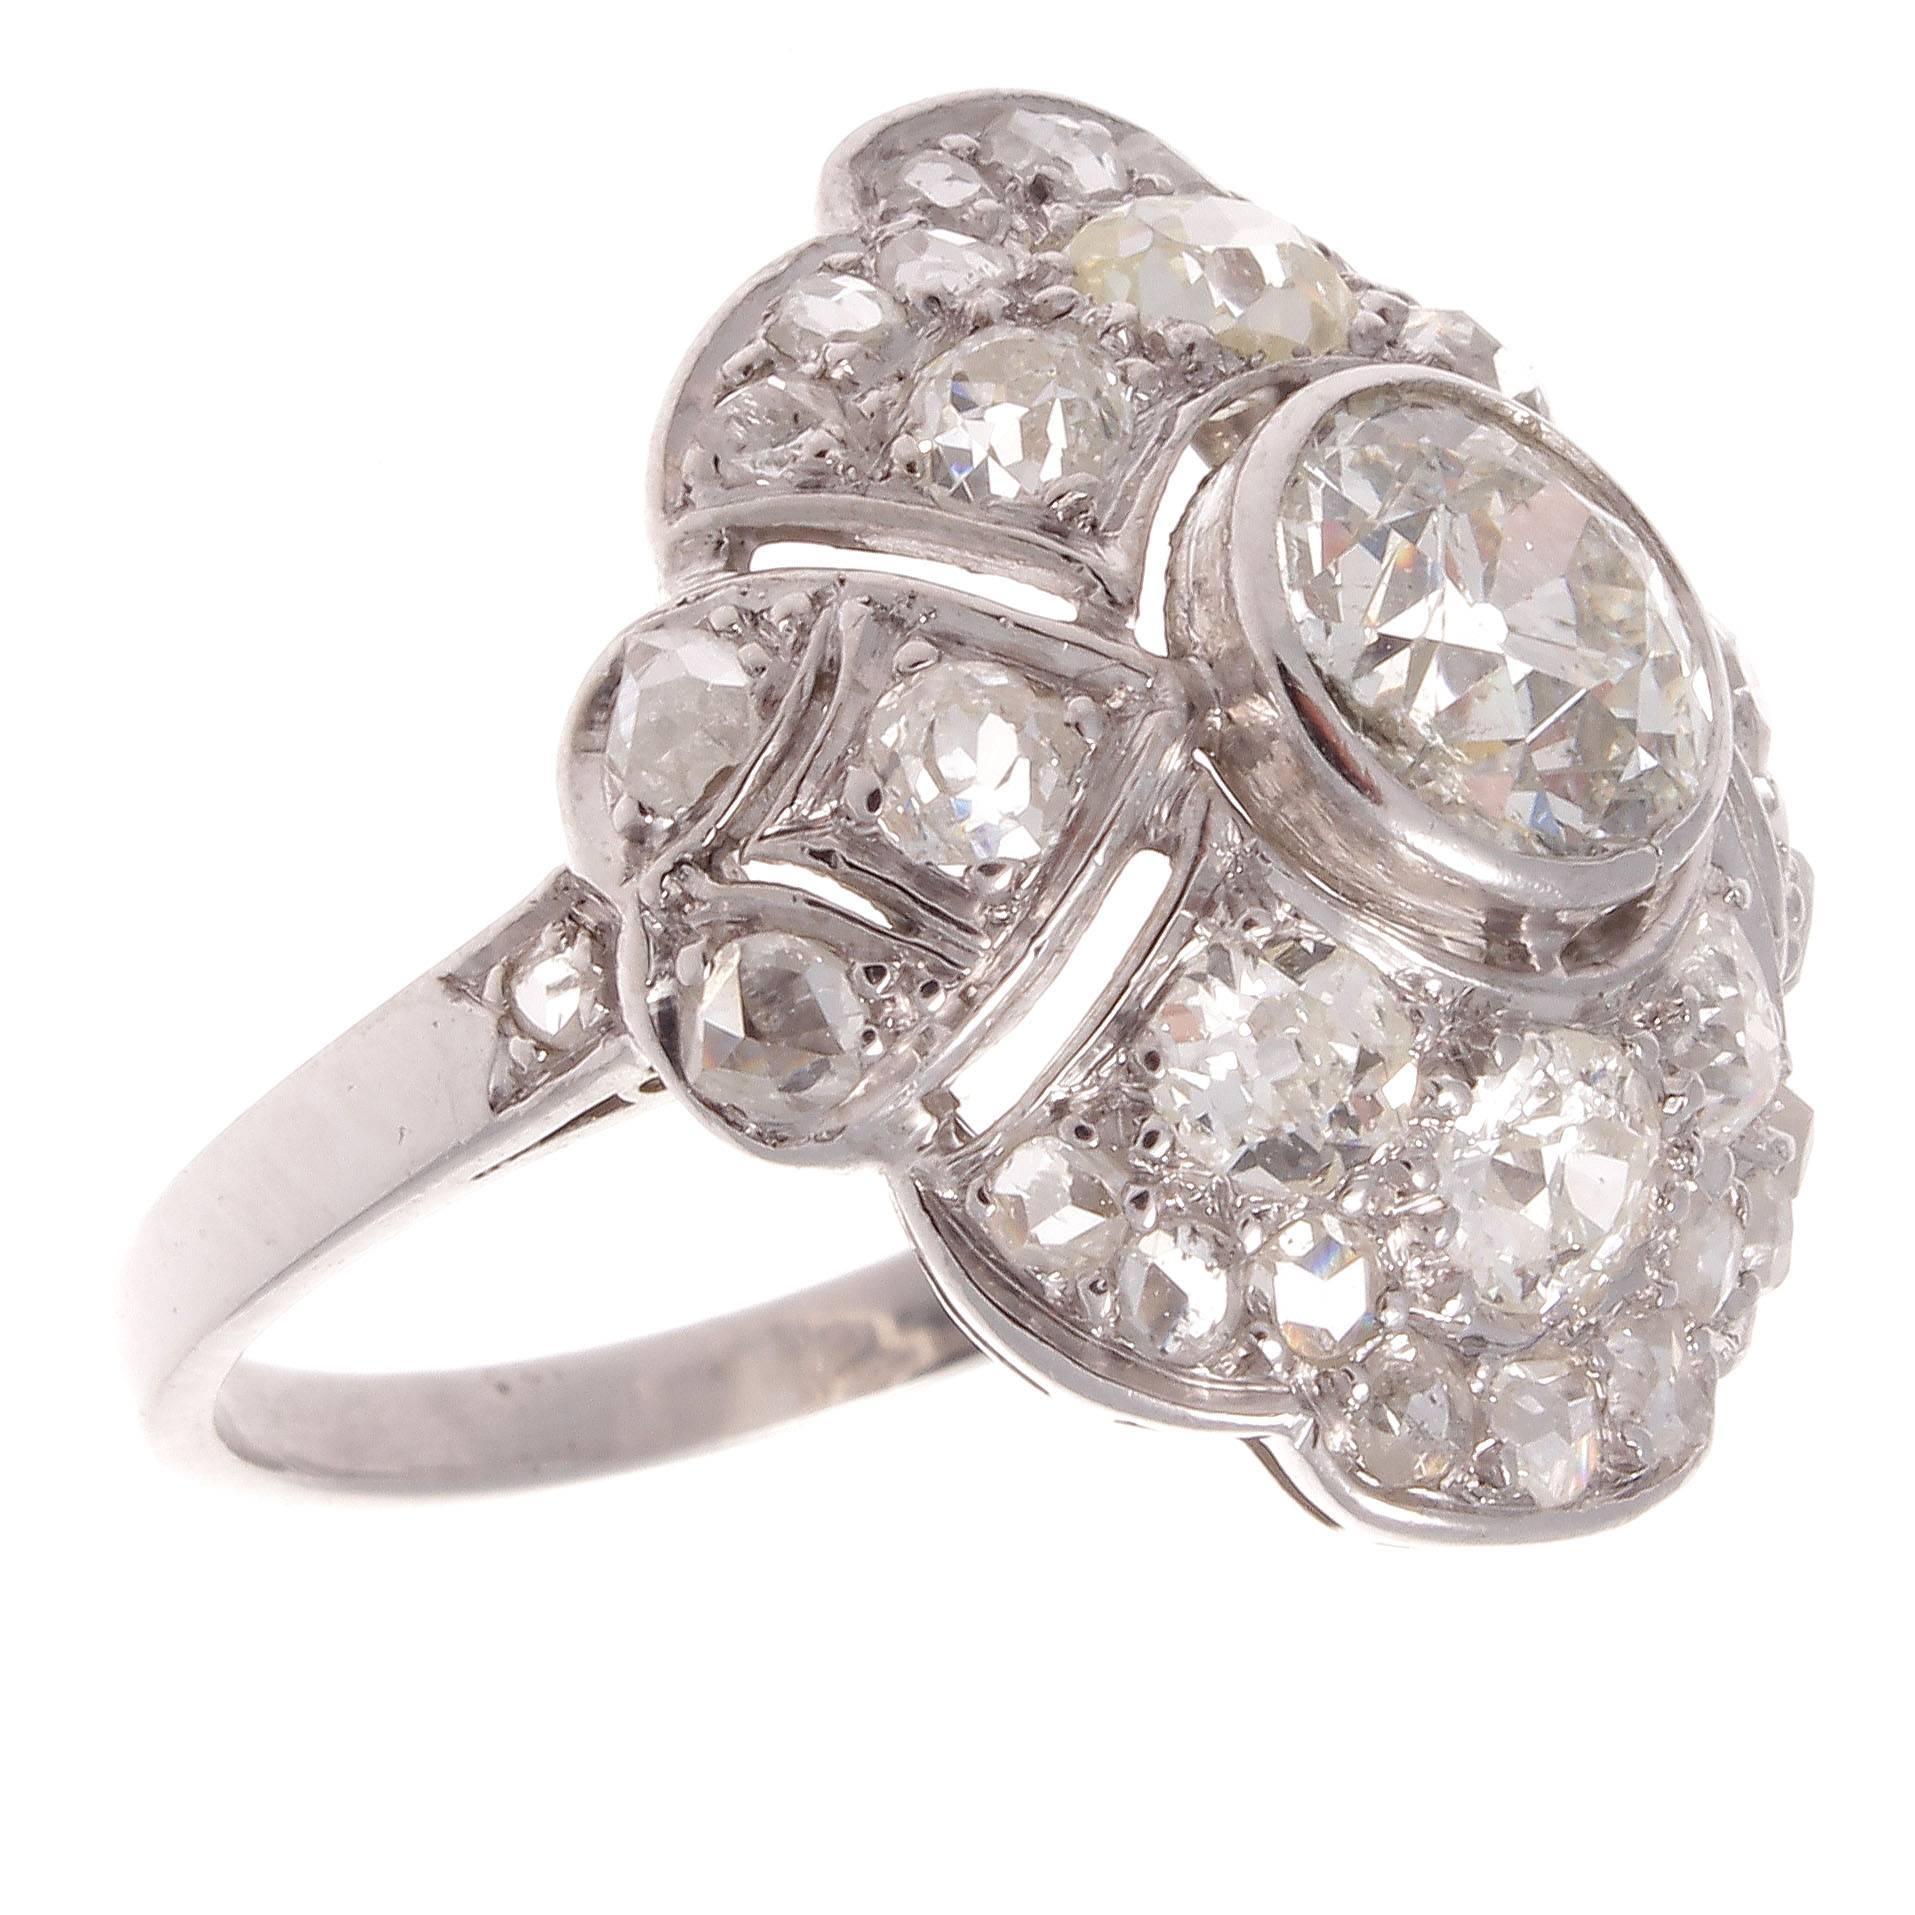 A well balanced geometric interpretation of the classic diamond cocktail ring. Featuring an old European cut diamond weighing approximately 0.90 carats that is G color, SI2 clarity with accenting diamonds weighing approximately 1.25 carats. The well